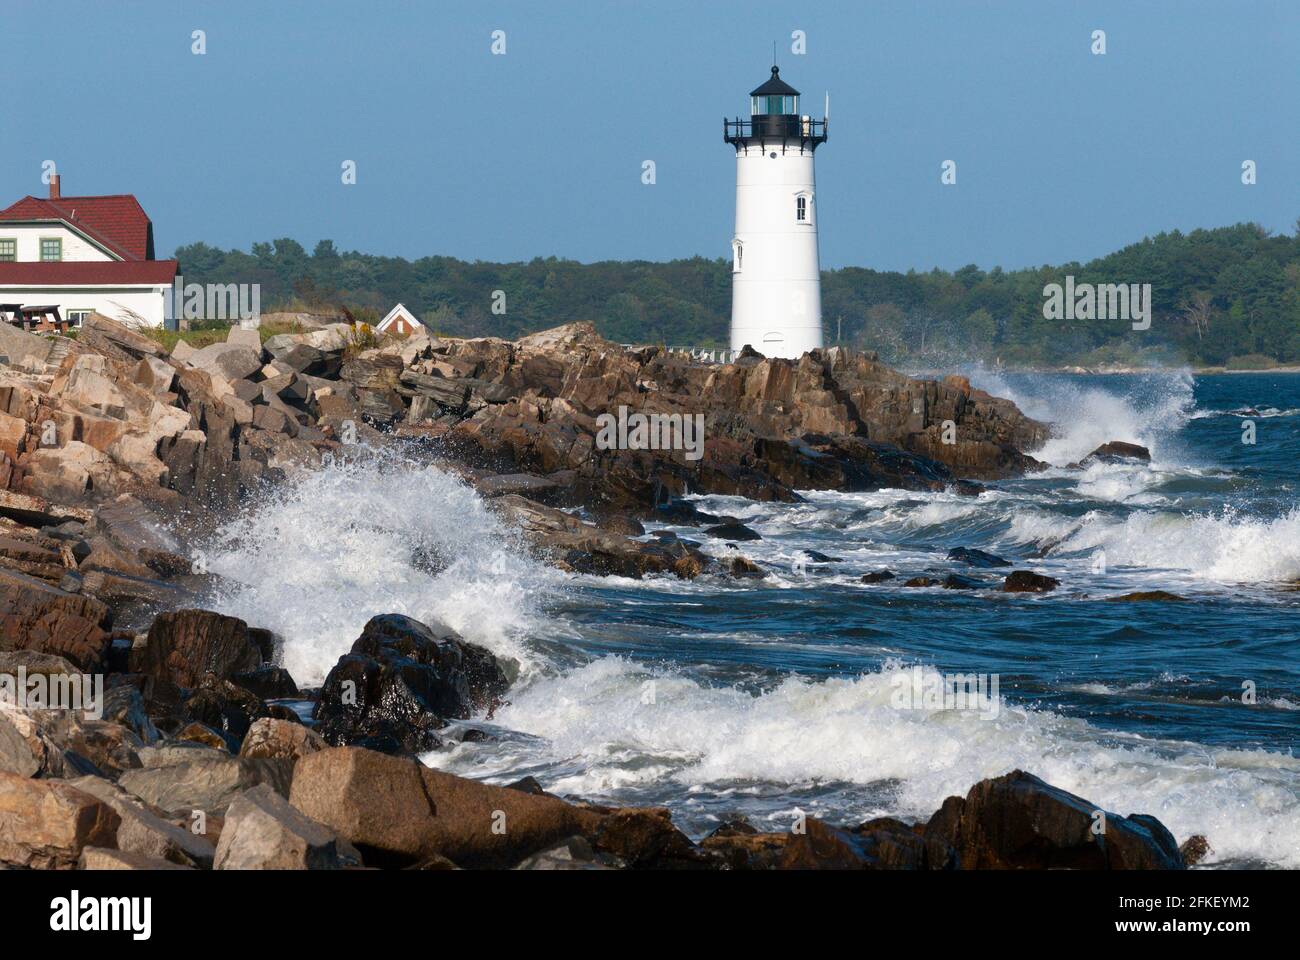 Large waves break over rocky shore by Portsmouth harbor lighthouse, also known as Fort Constitution light, and nearby keepers quarters, which is now a Stock Photo